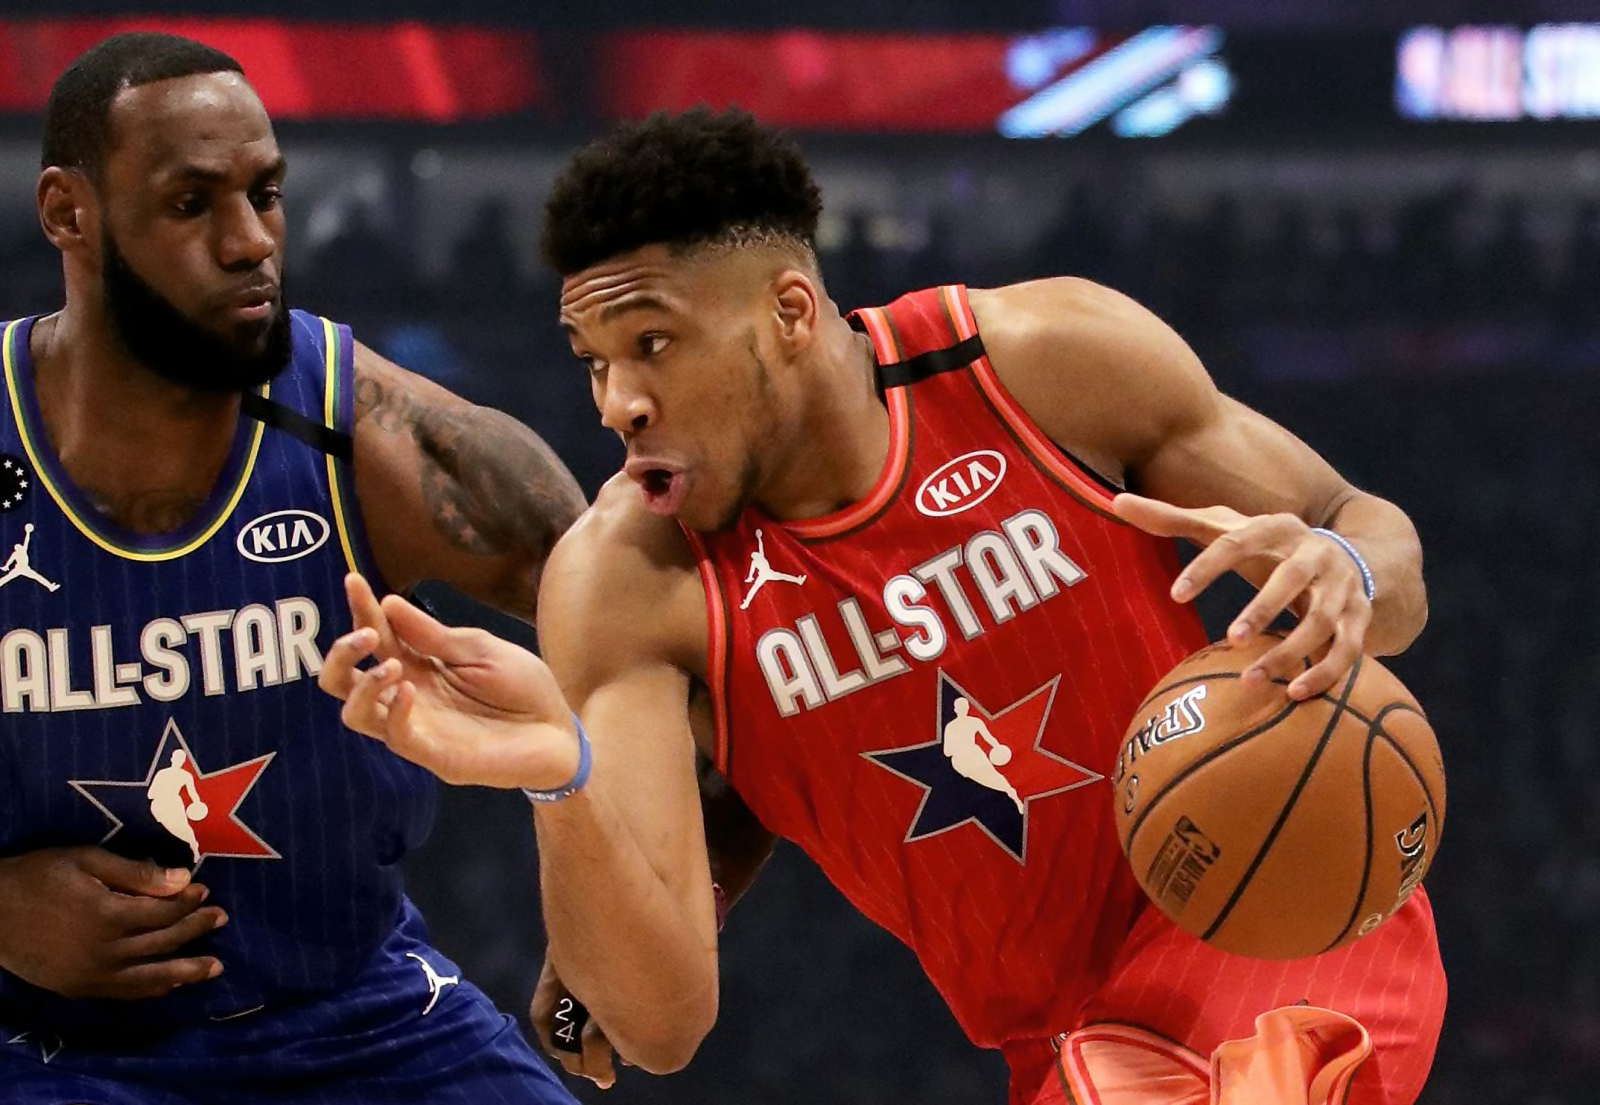 Grading Each Event From The Nbas 2020 All Star Weekend In Chicago